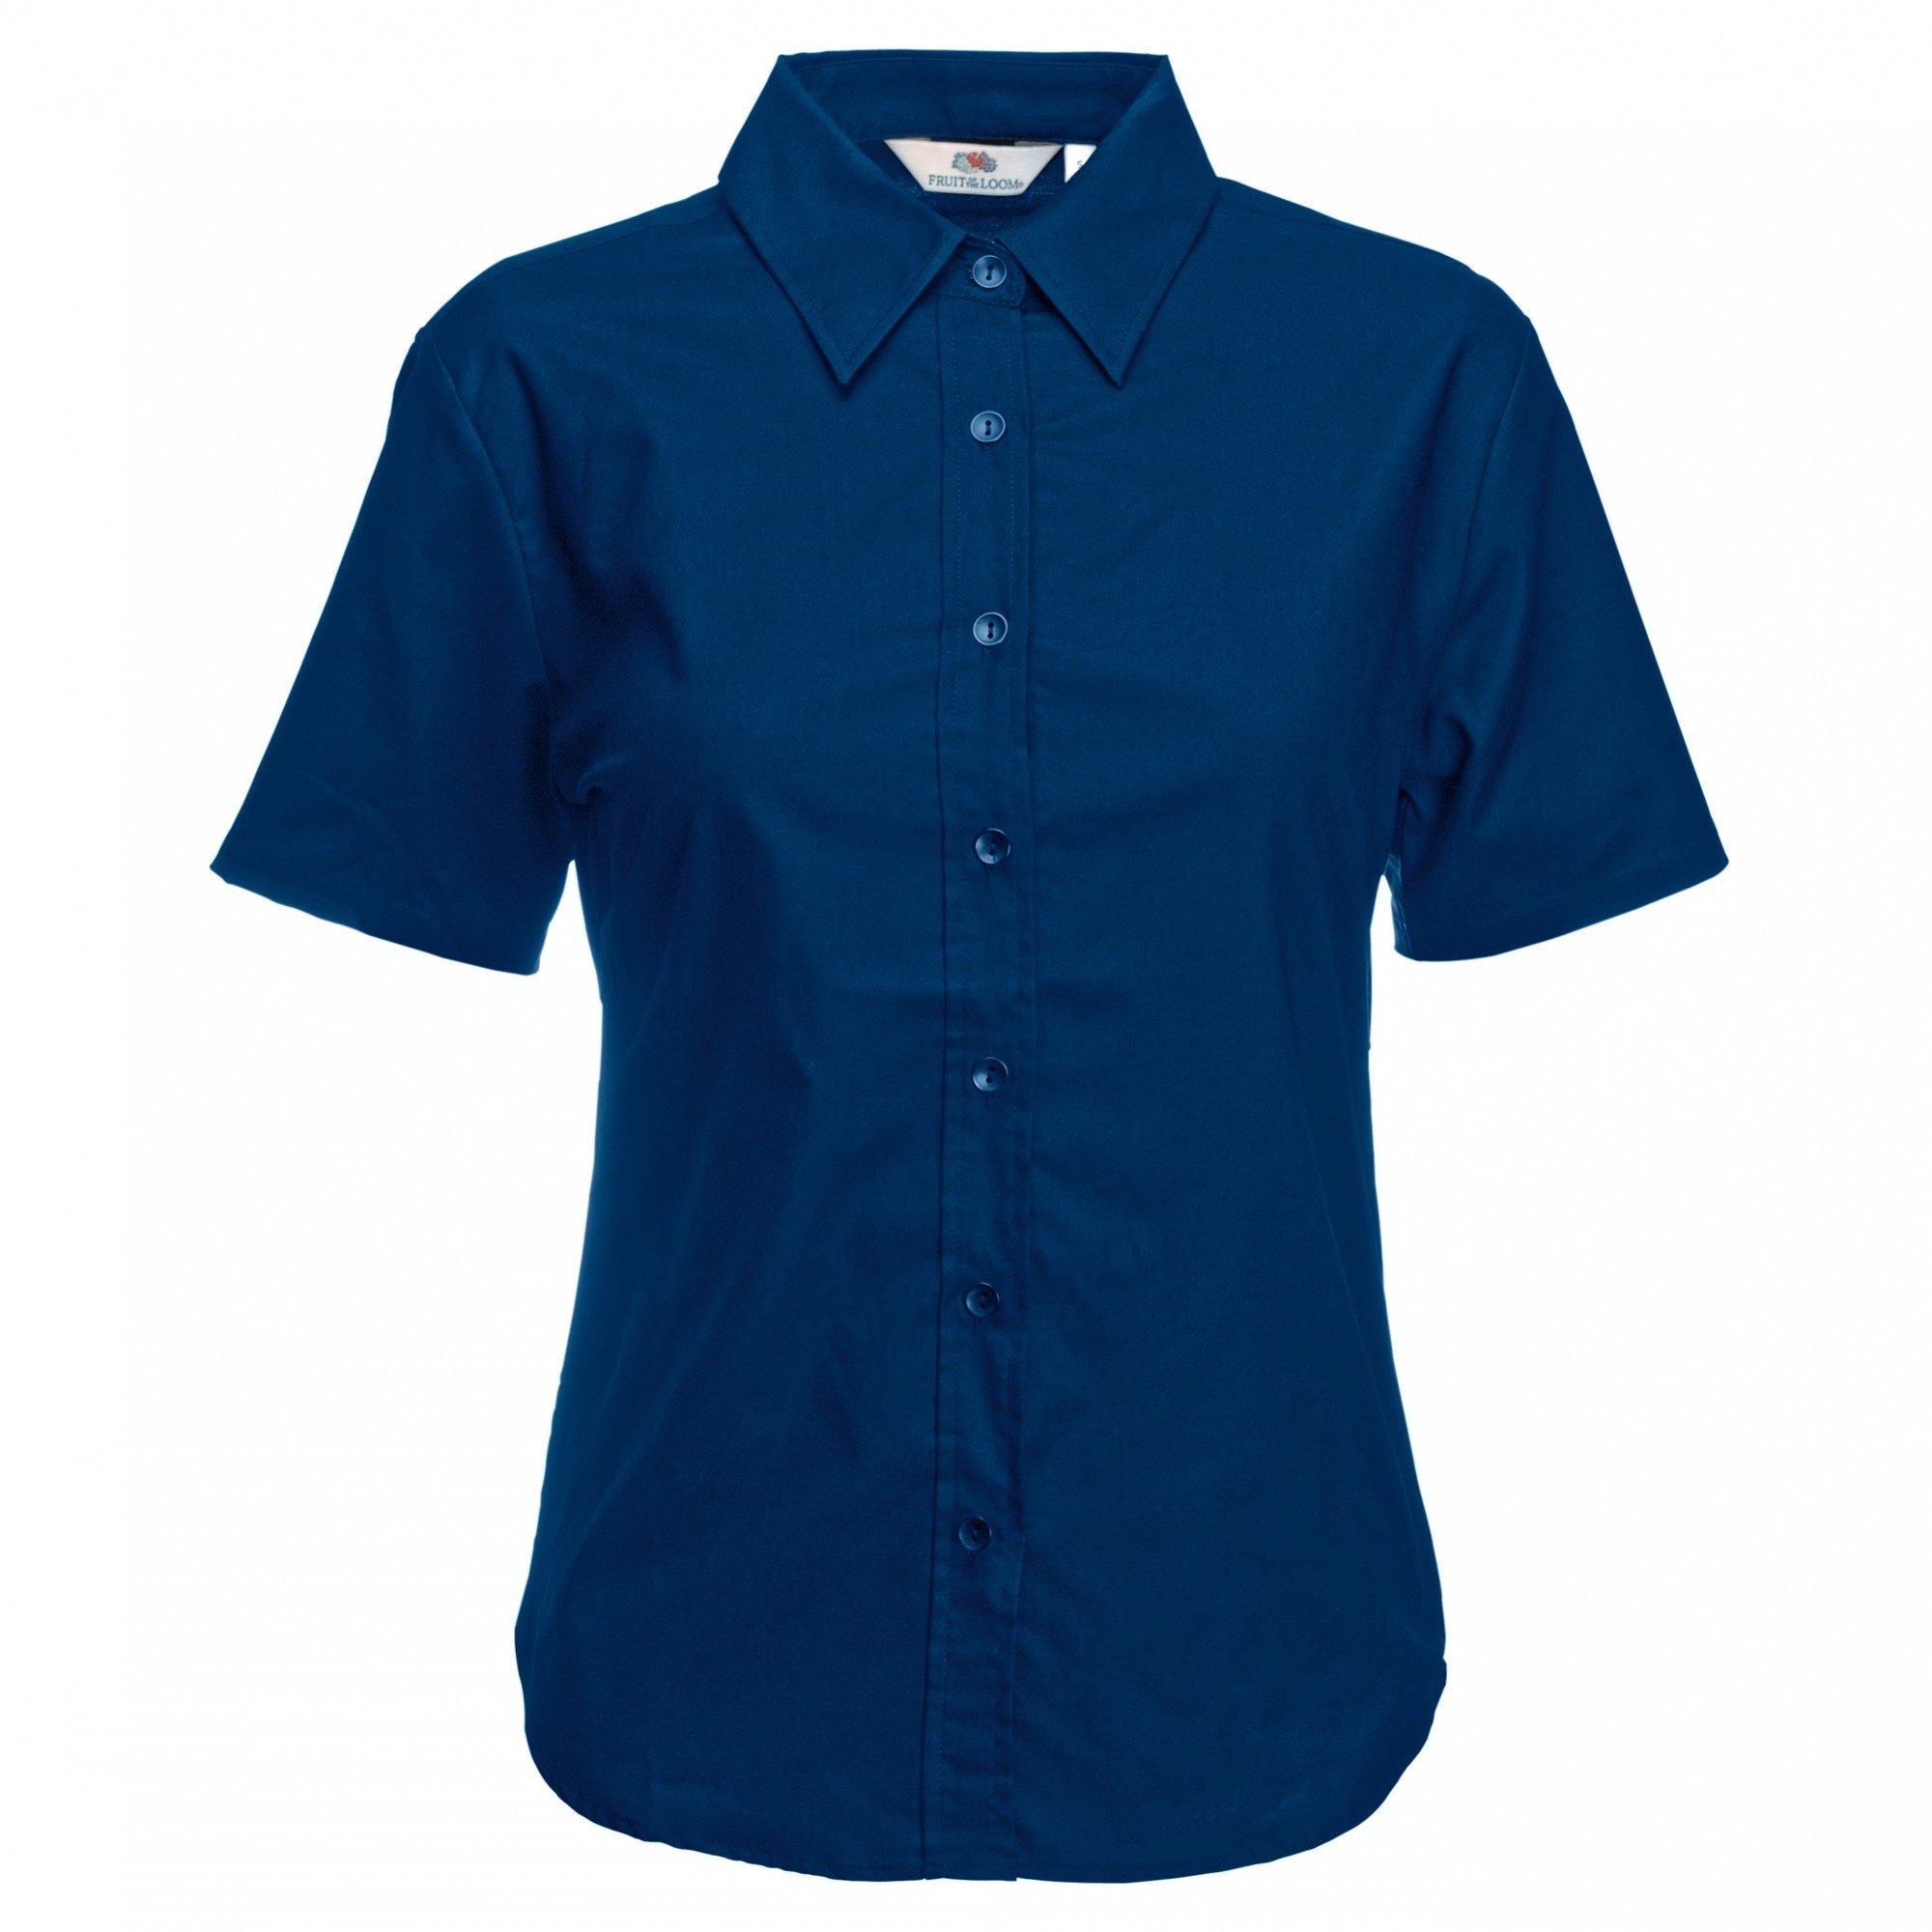 Image of Fruit of the Loom LadyFit Oxford Bluse, Kurzarm - L